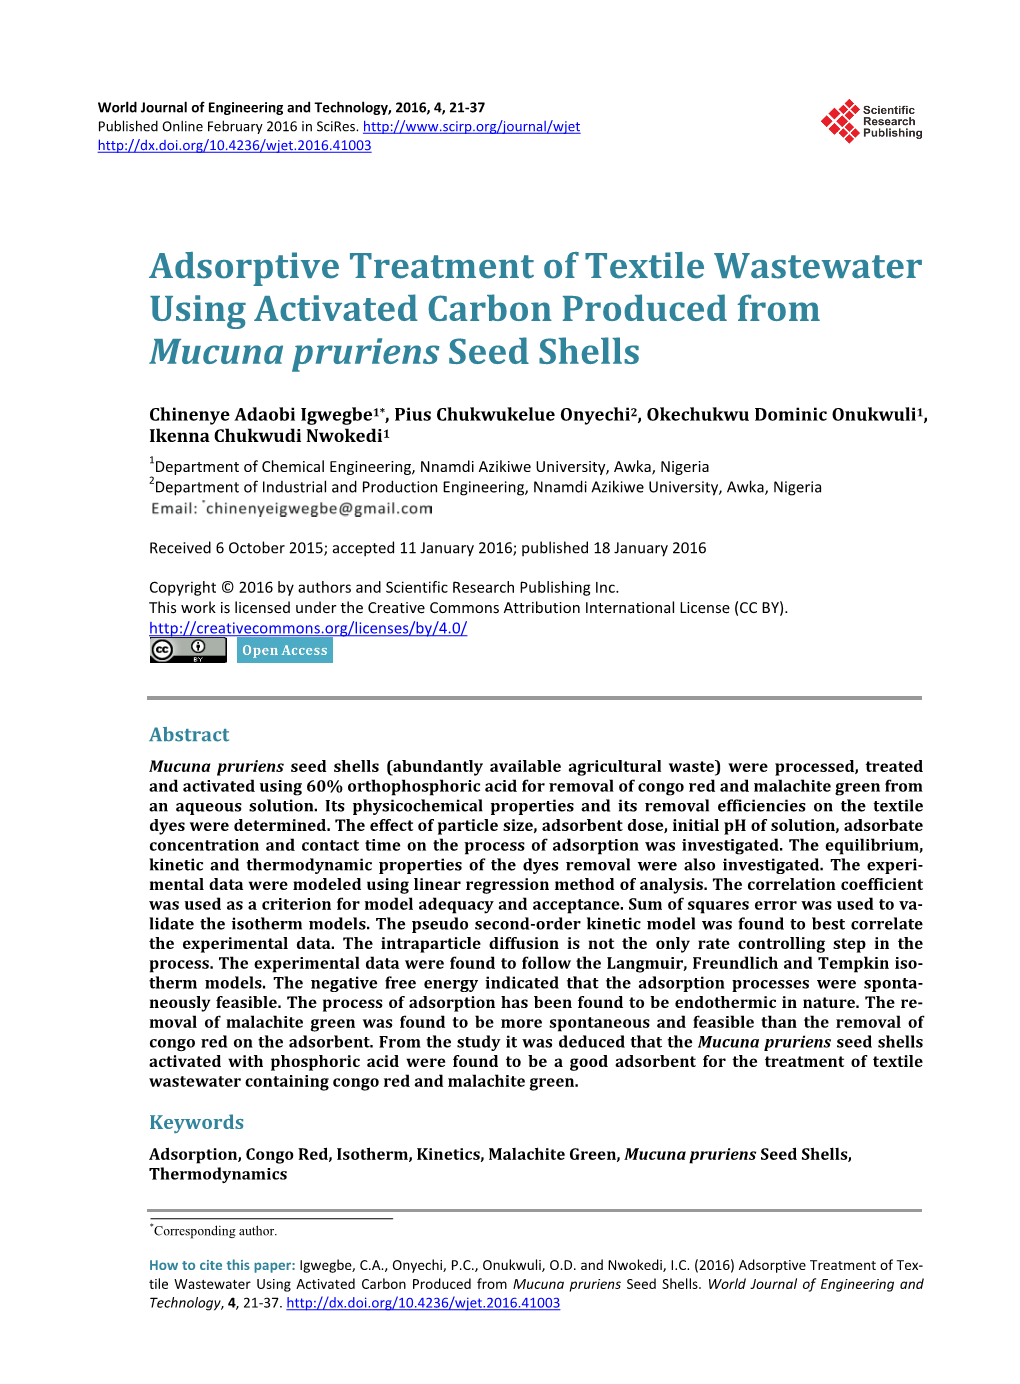 Adsorptive Treatment of Textile Wastewater Using Activated Carbon Produced from Mucuna Pruriens Seed Shells